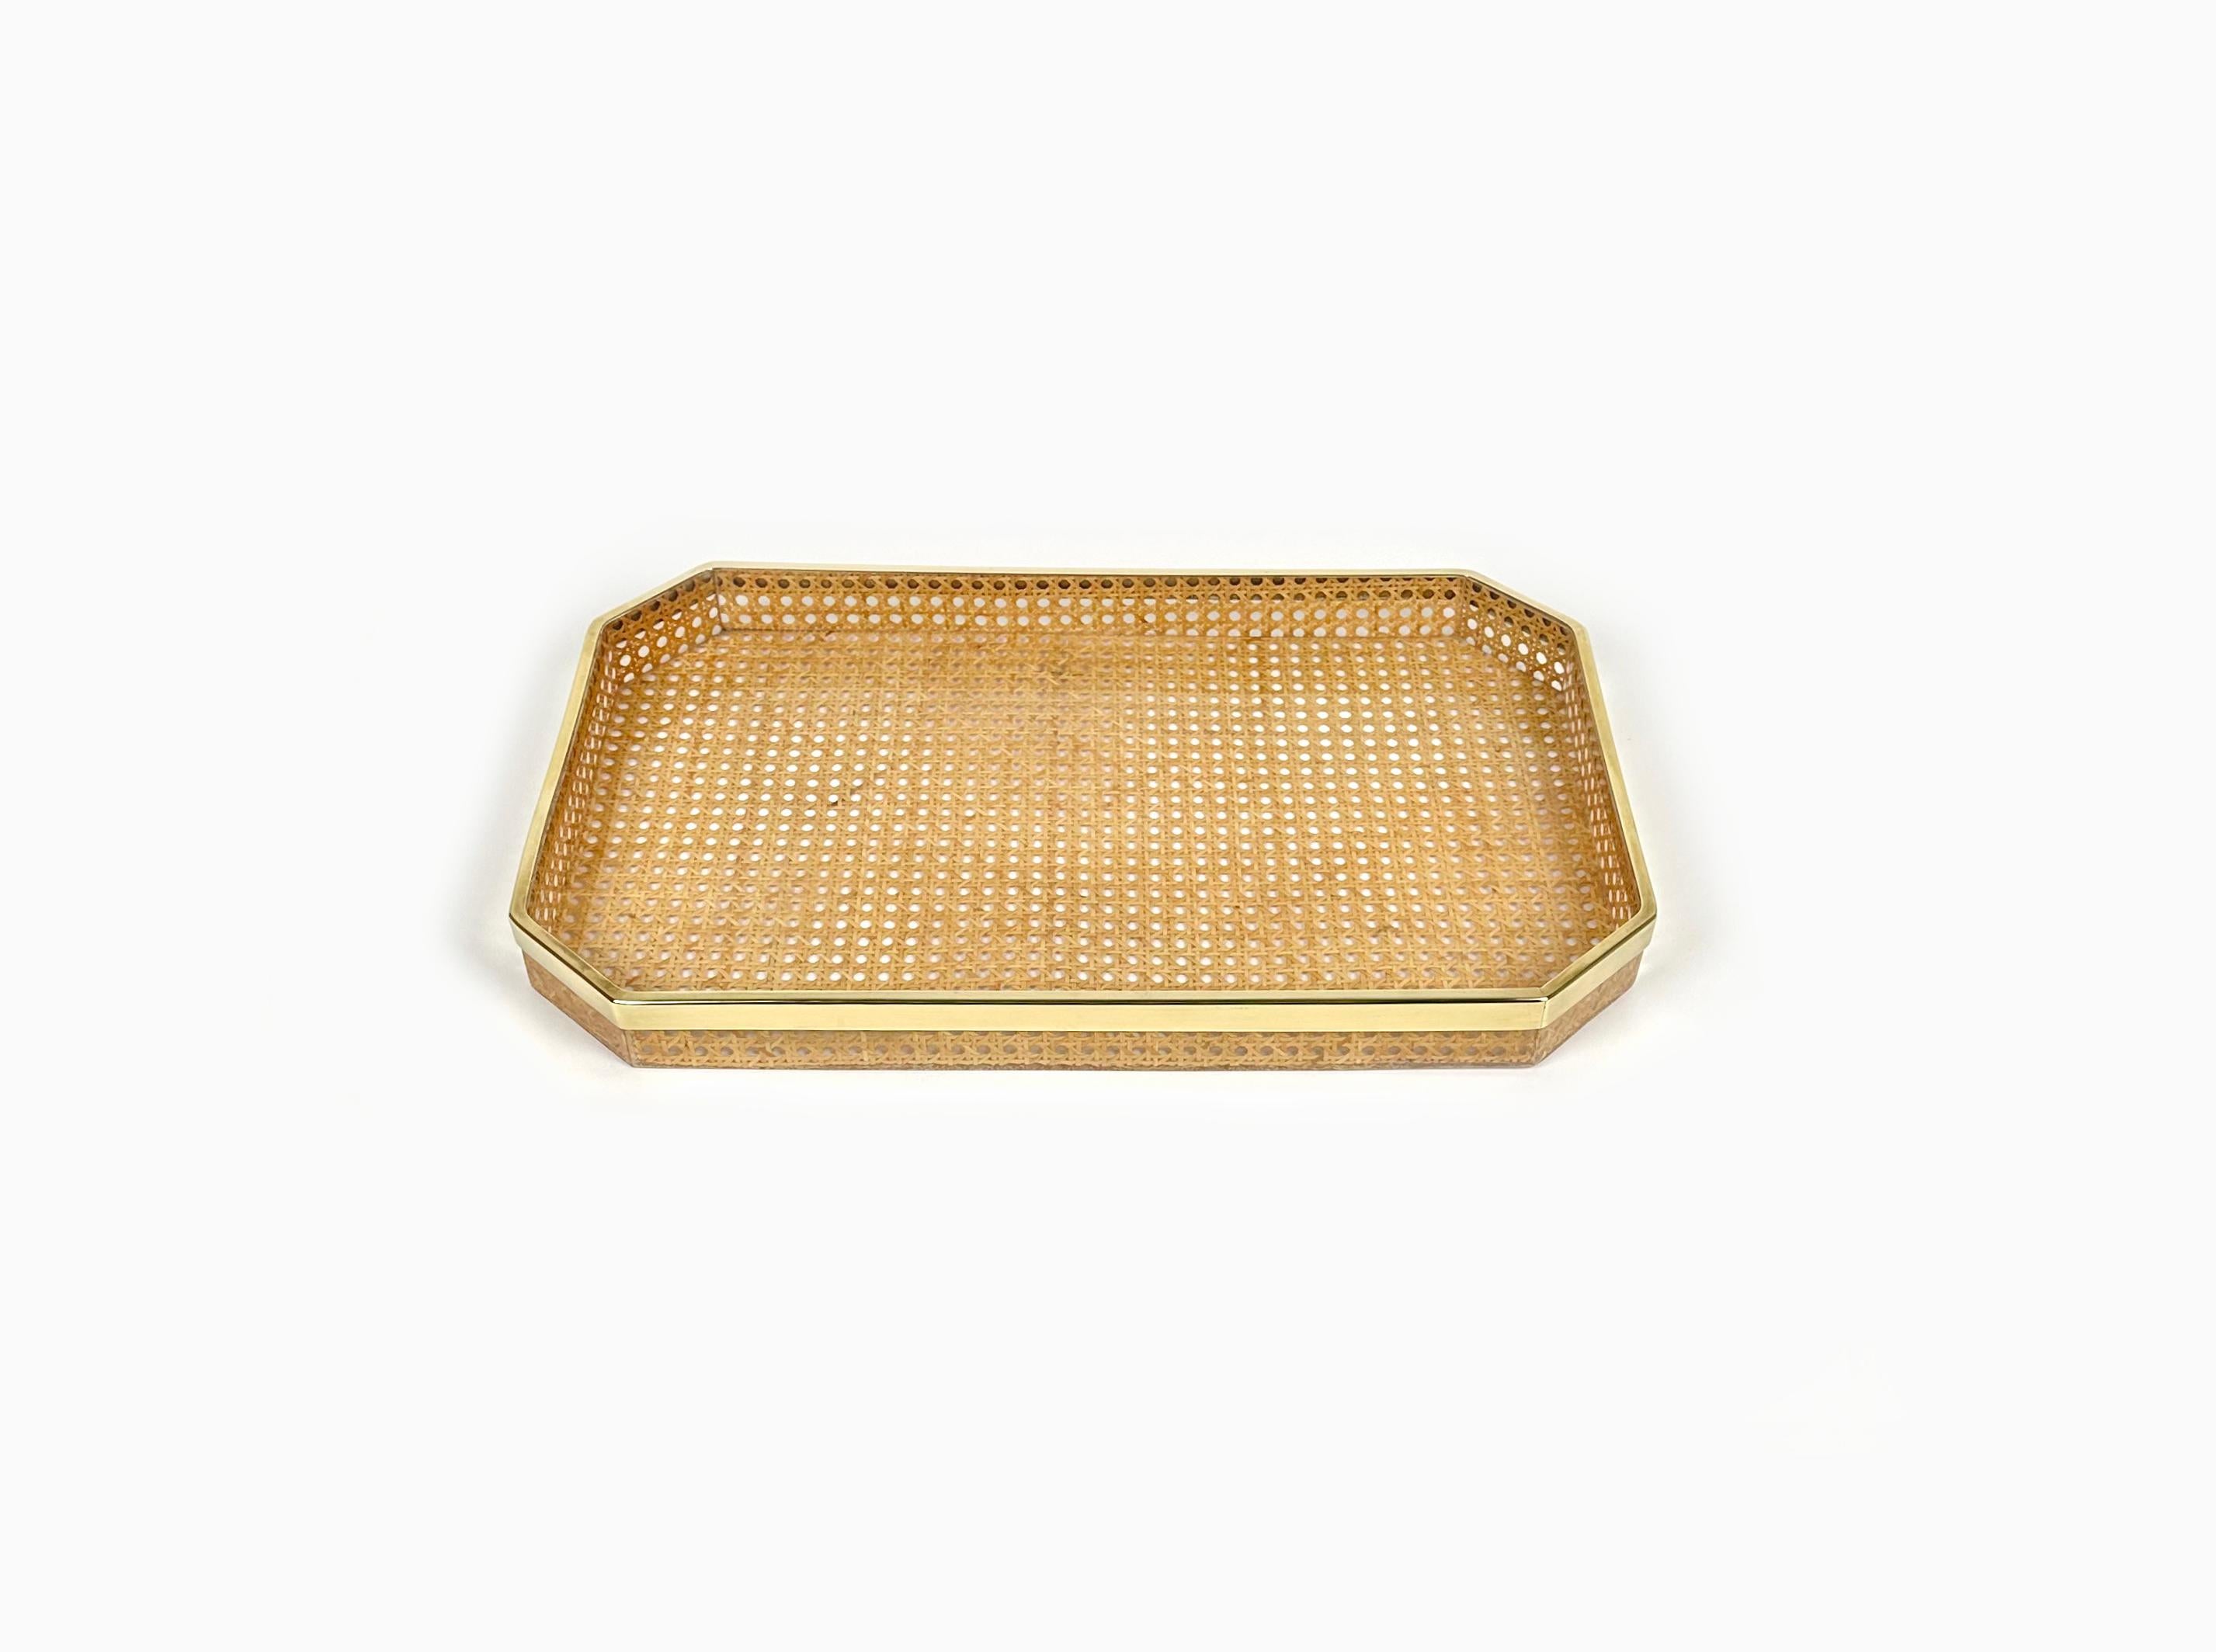 Octagonal serving tray / centerpiece in lucite and rattan with brass border in the style of Christian Dior.

Made in Italy in the 1970s.

Great accessory for any modern interior.